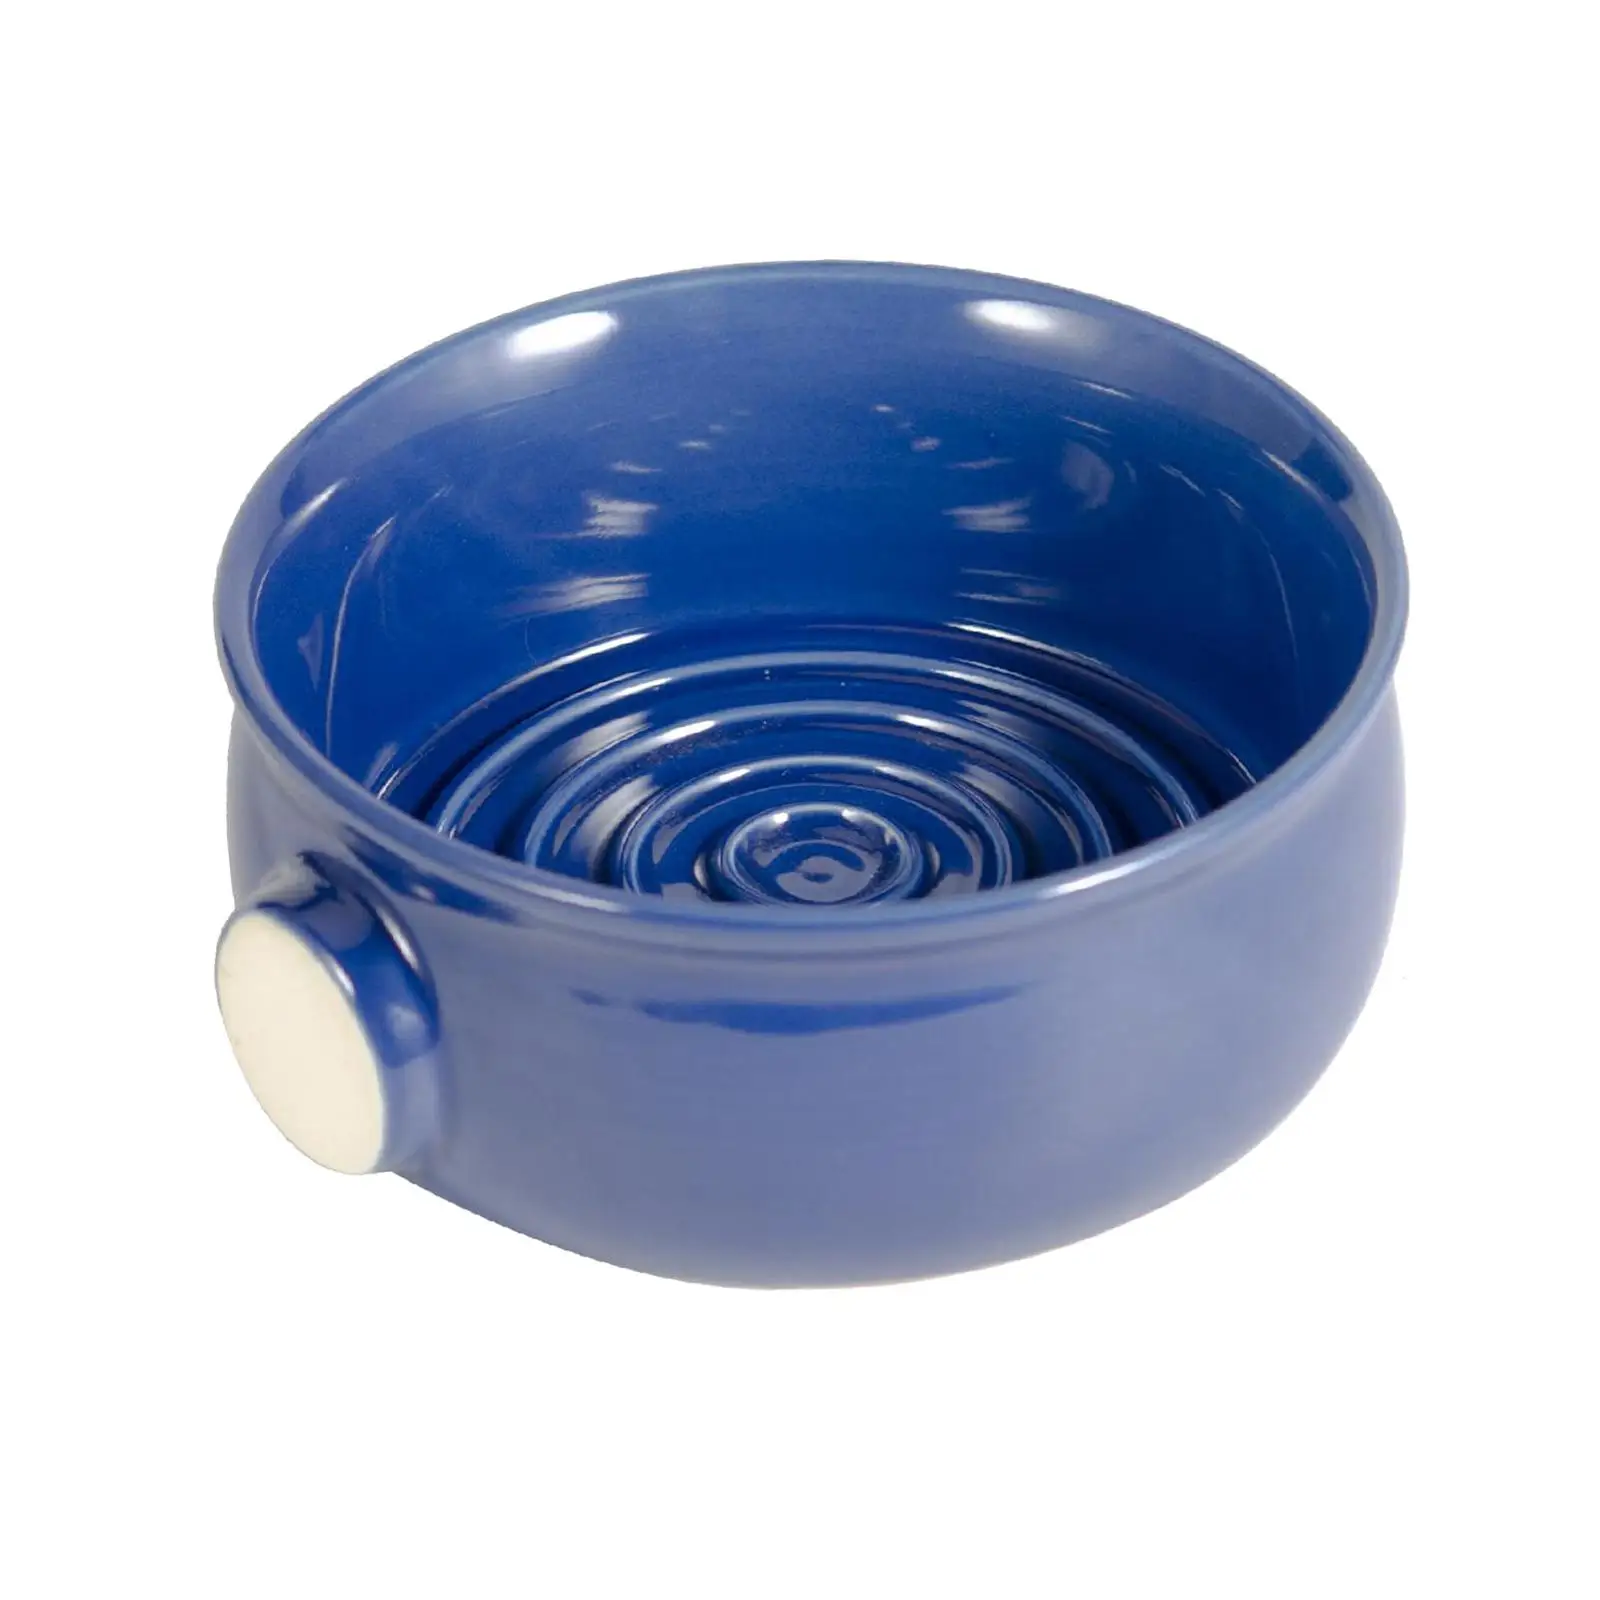 Ceramic Shaving Bowl Wide Mouth Easier to Lather and Clean Shaving Mug